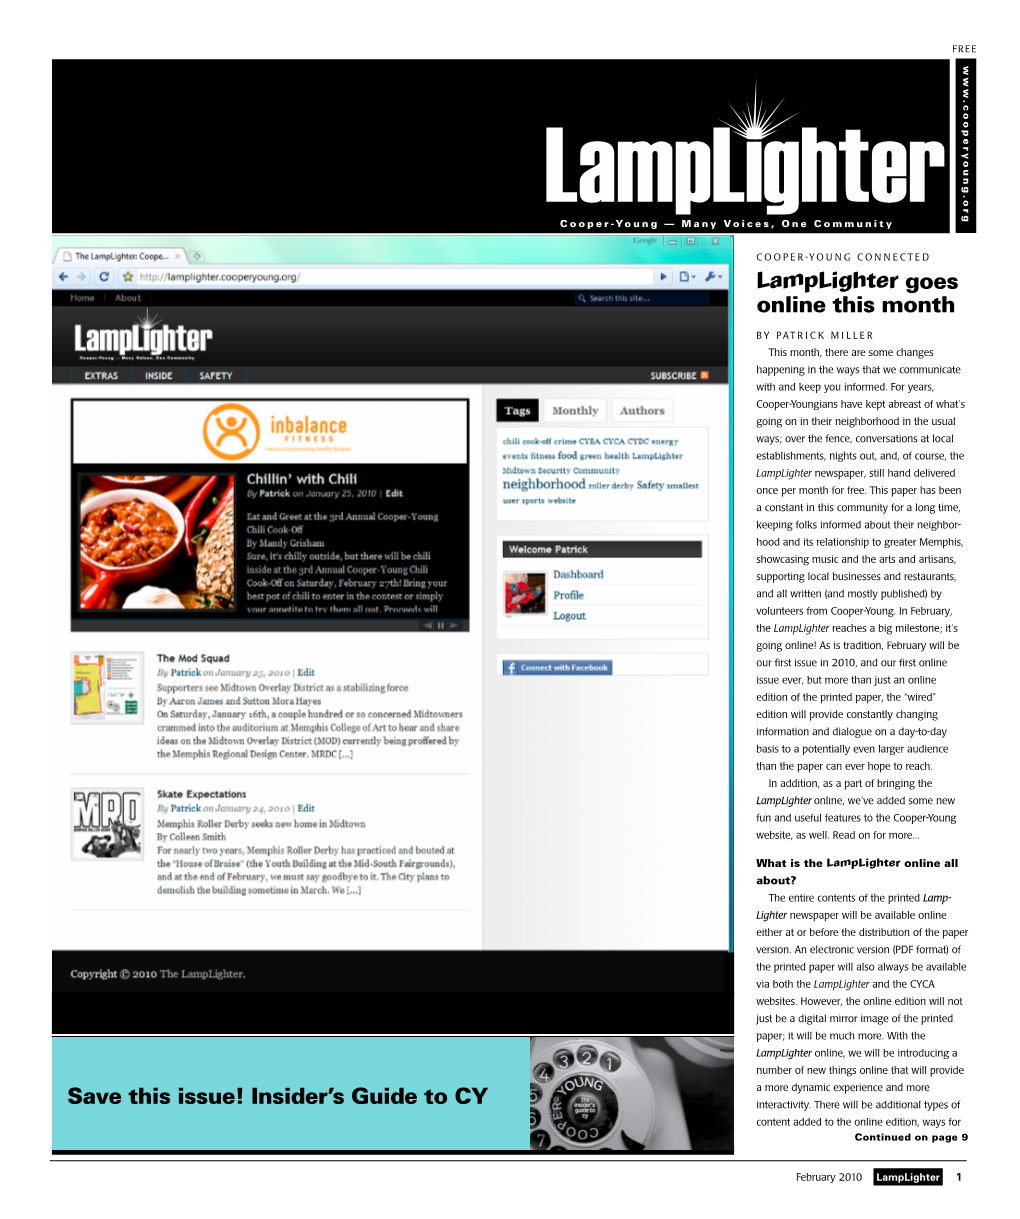 Save This Issue! Insider's Guide to CY Lamplighter Goes Online This Month